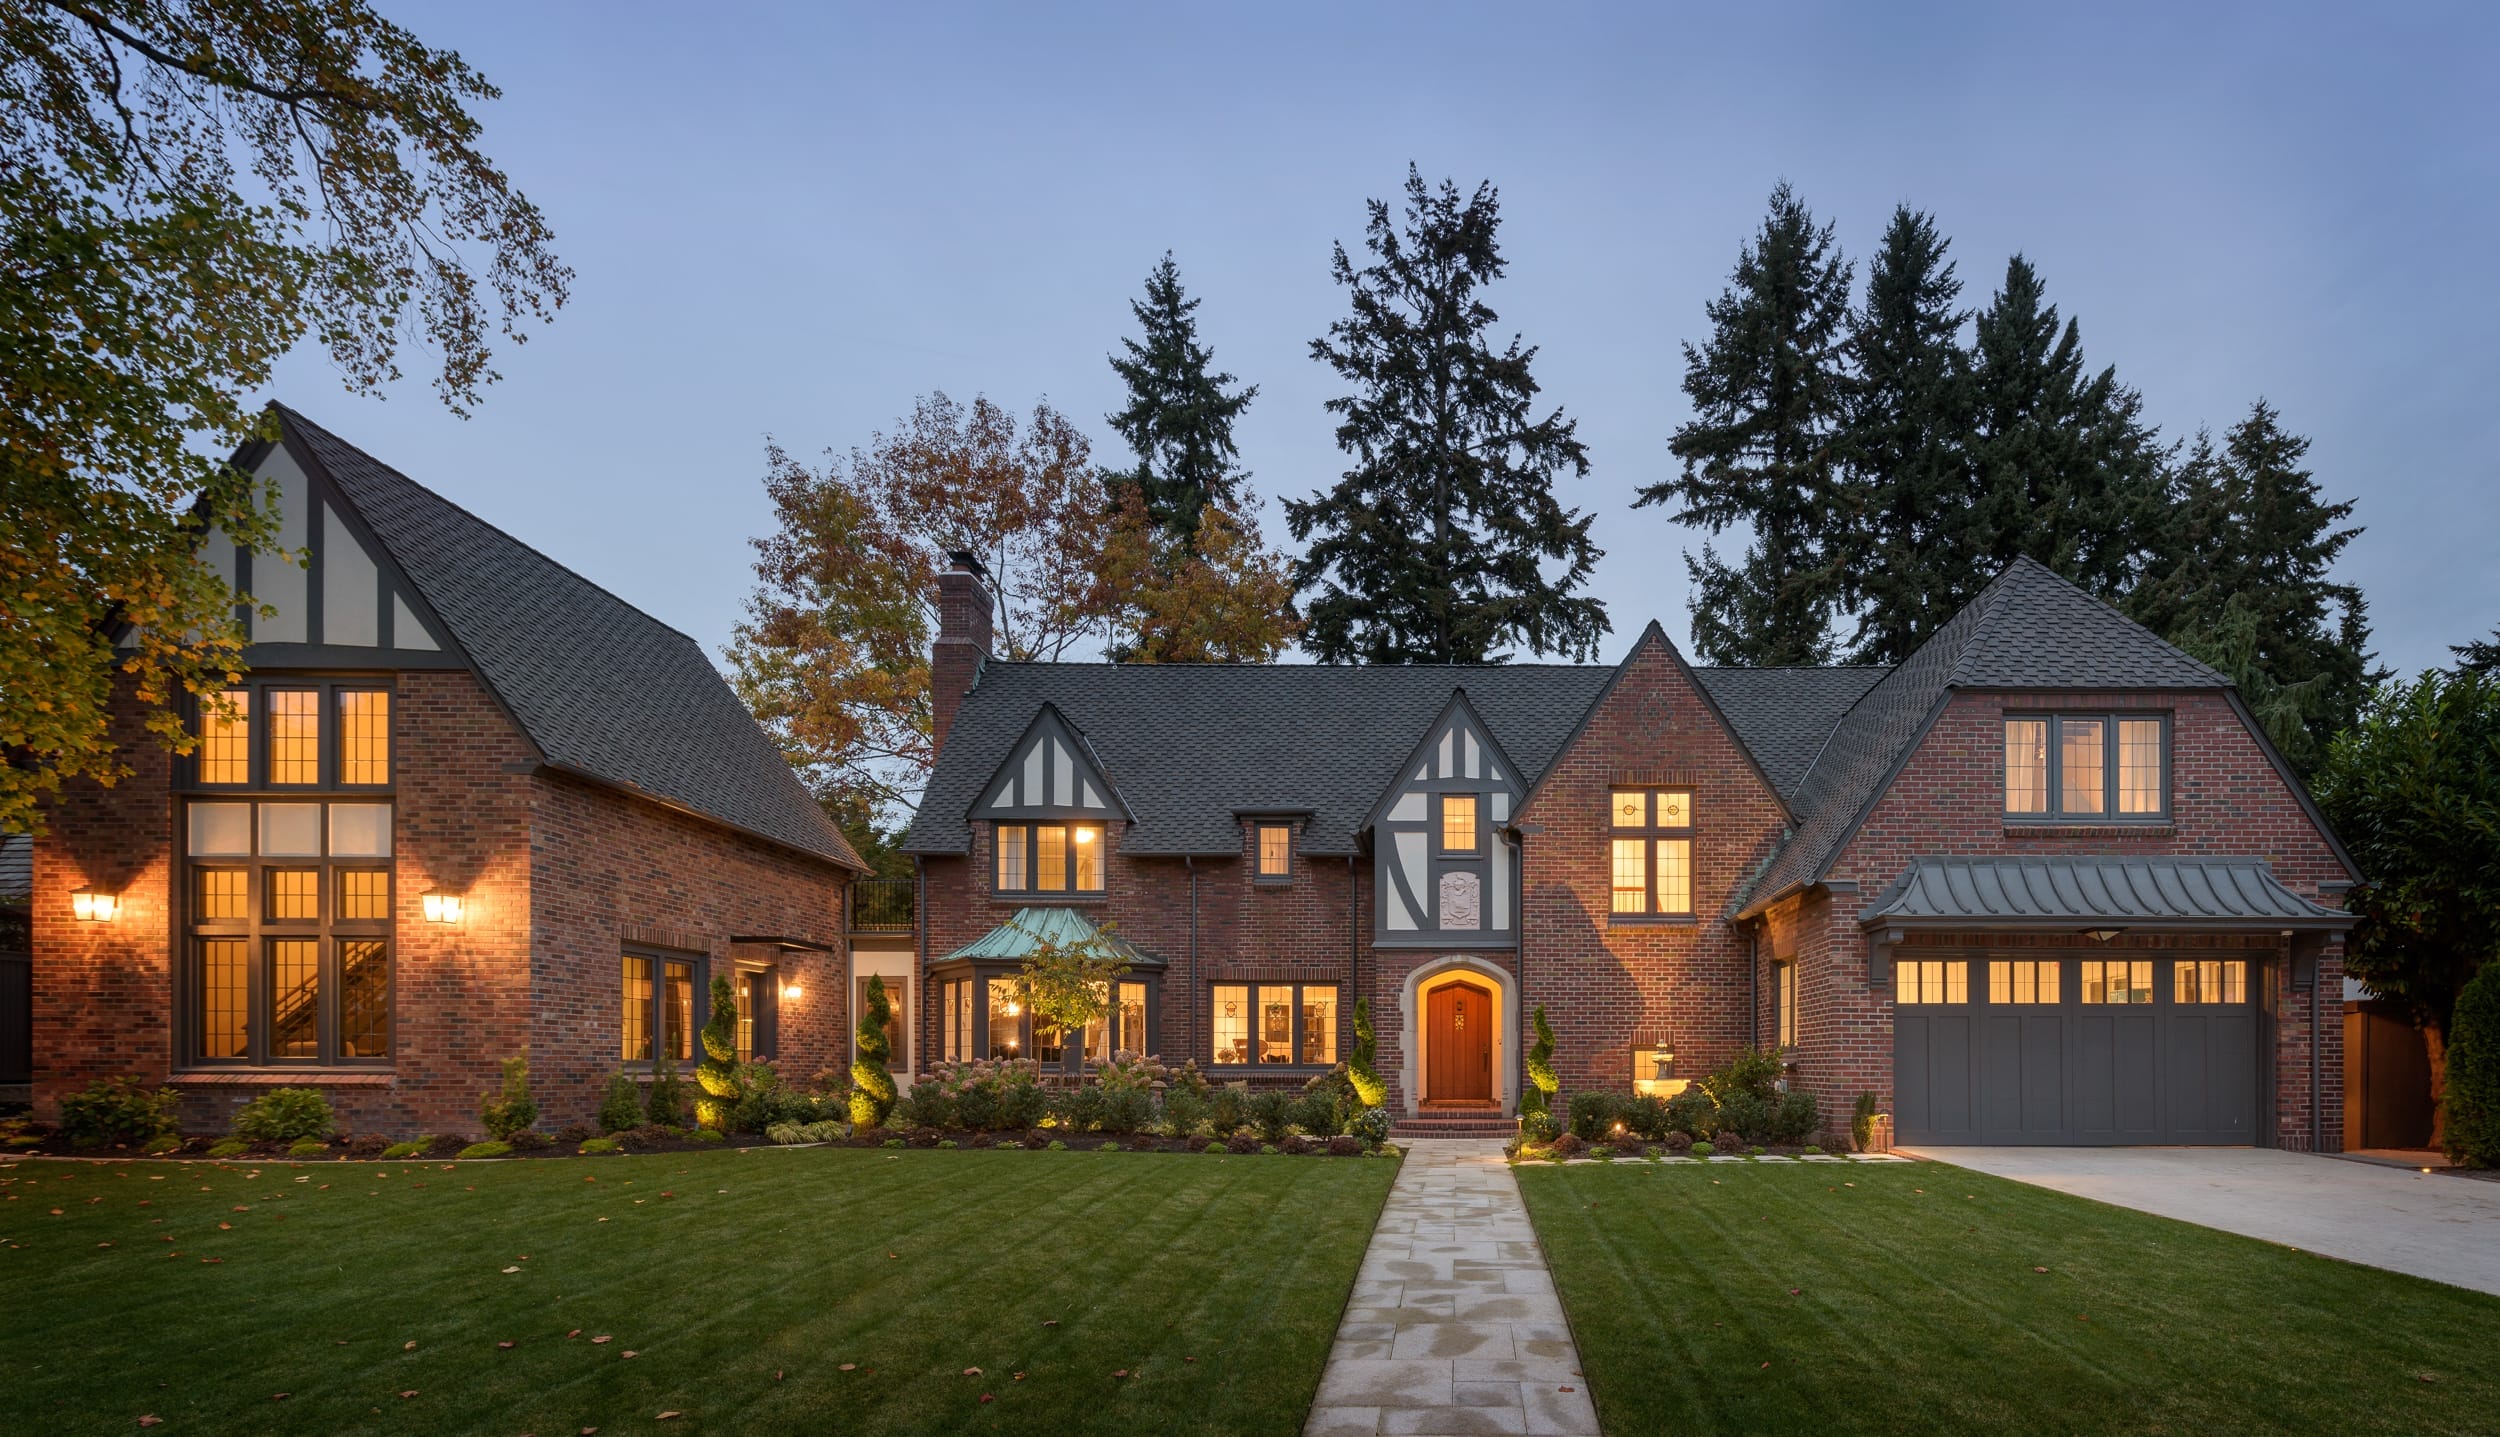 The exterior of a brick home at dusk.